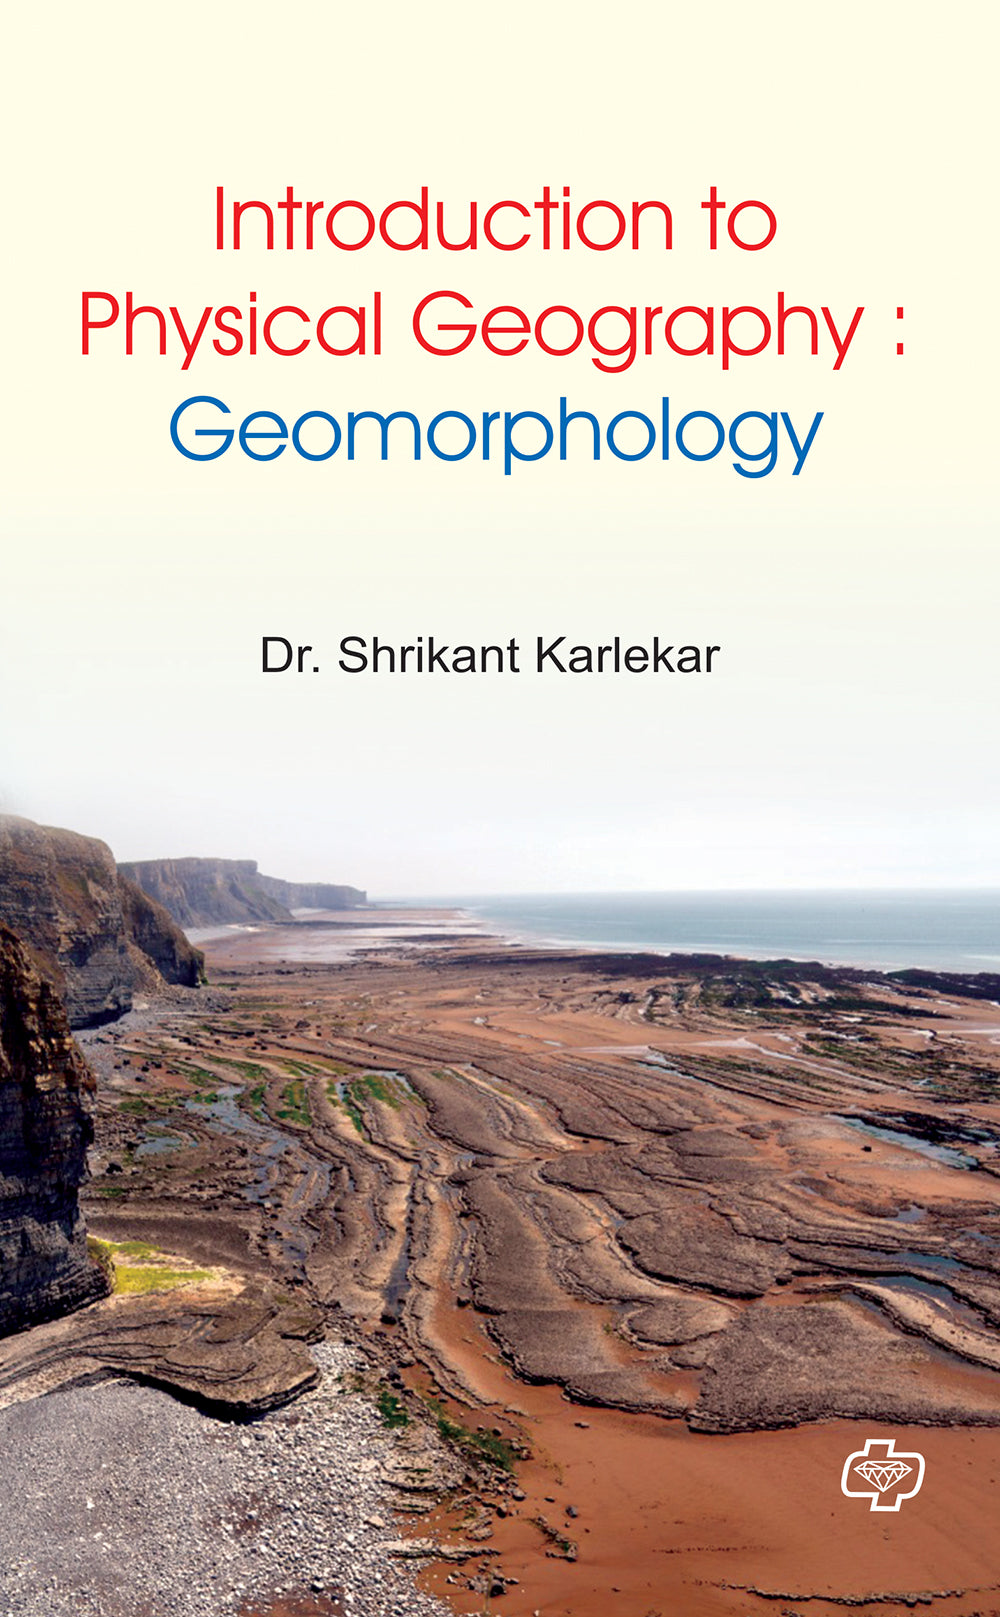 Introduction to Physical Geography : Geomorphology